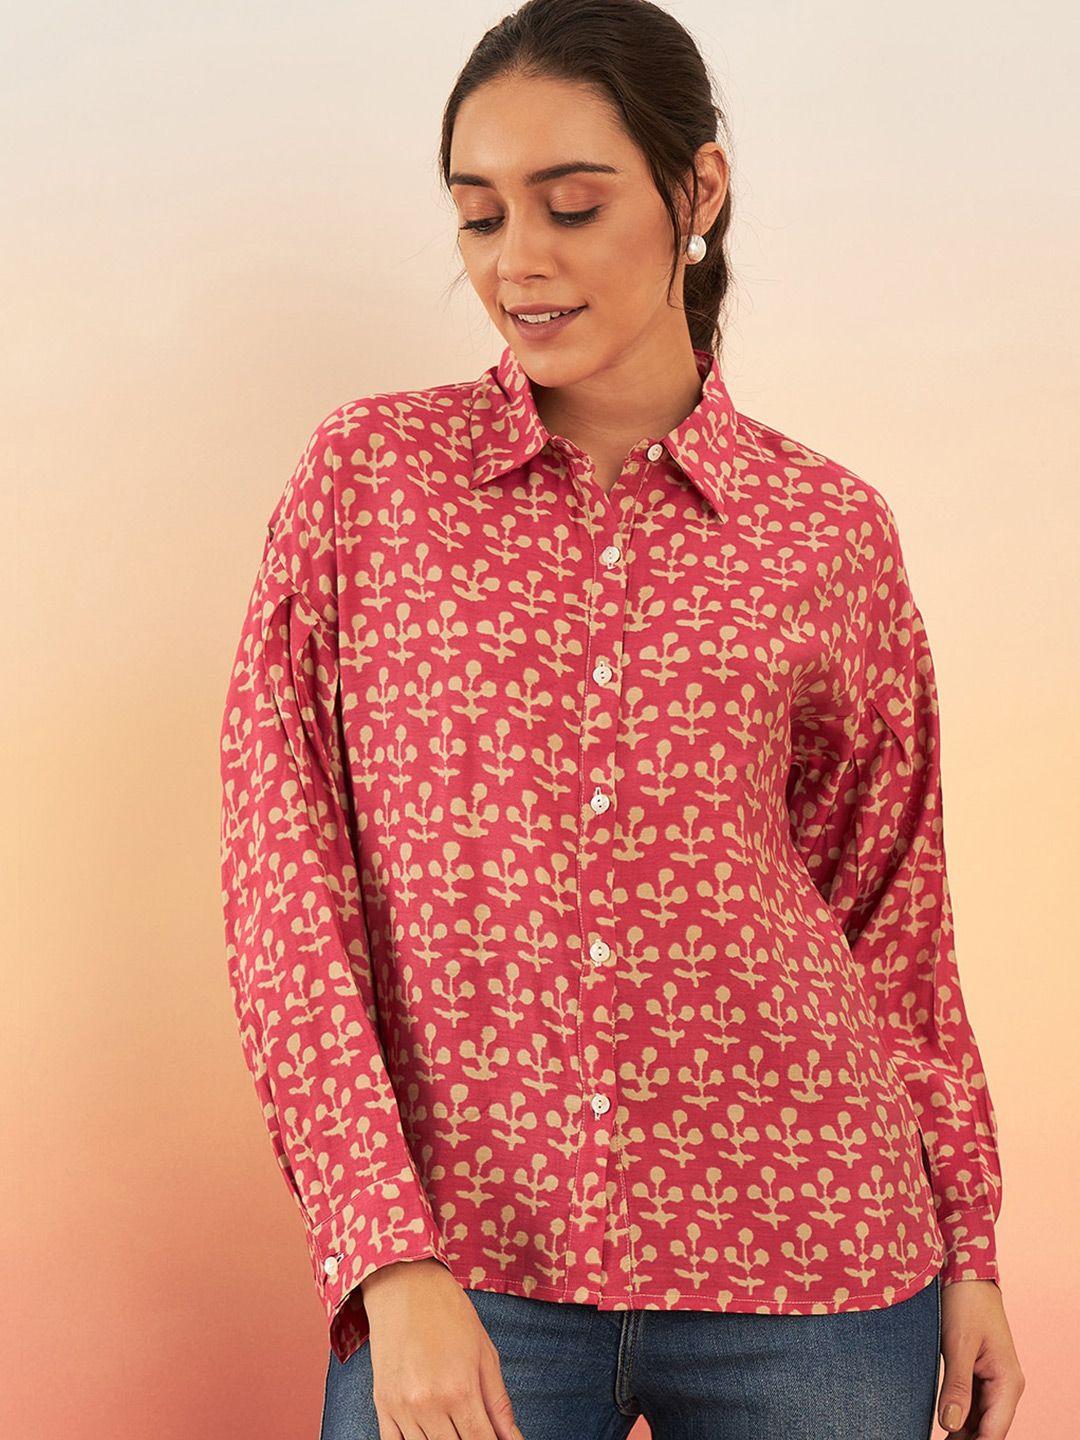 sangria-red-&-off-white-ethnic-motifs-printed-shirt-style-top